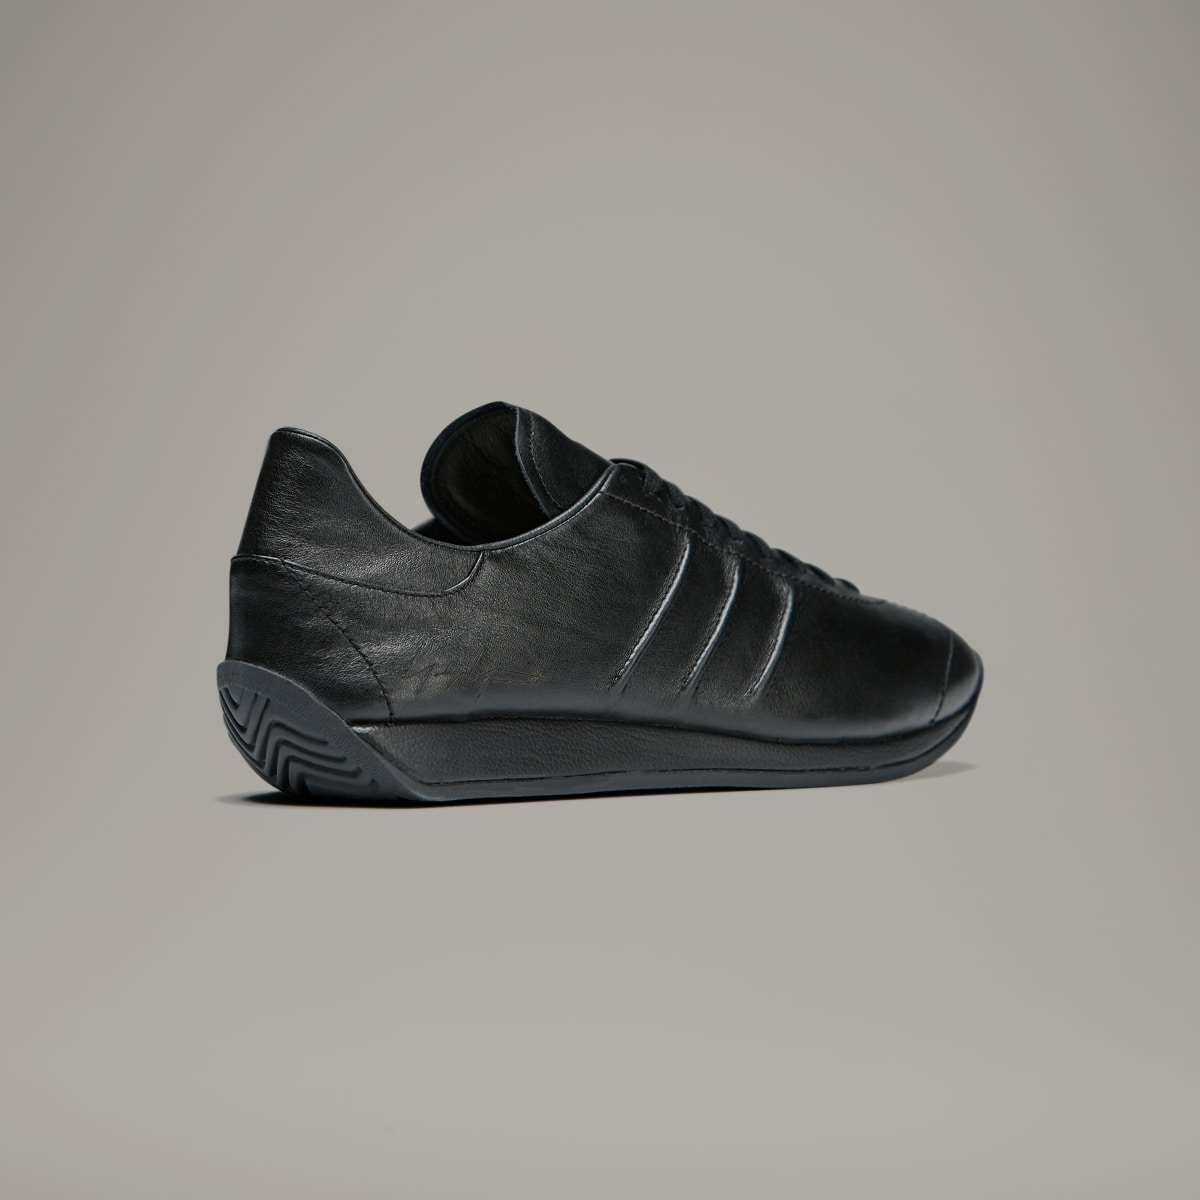 Adidas Buty Y-3 Country. 7